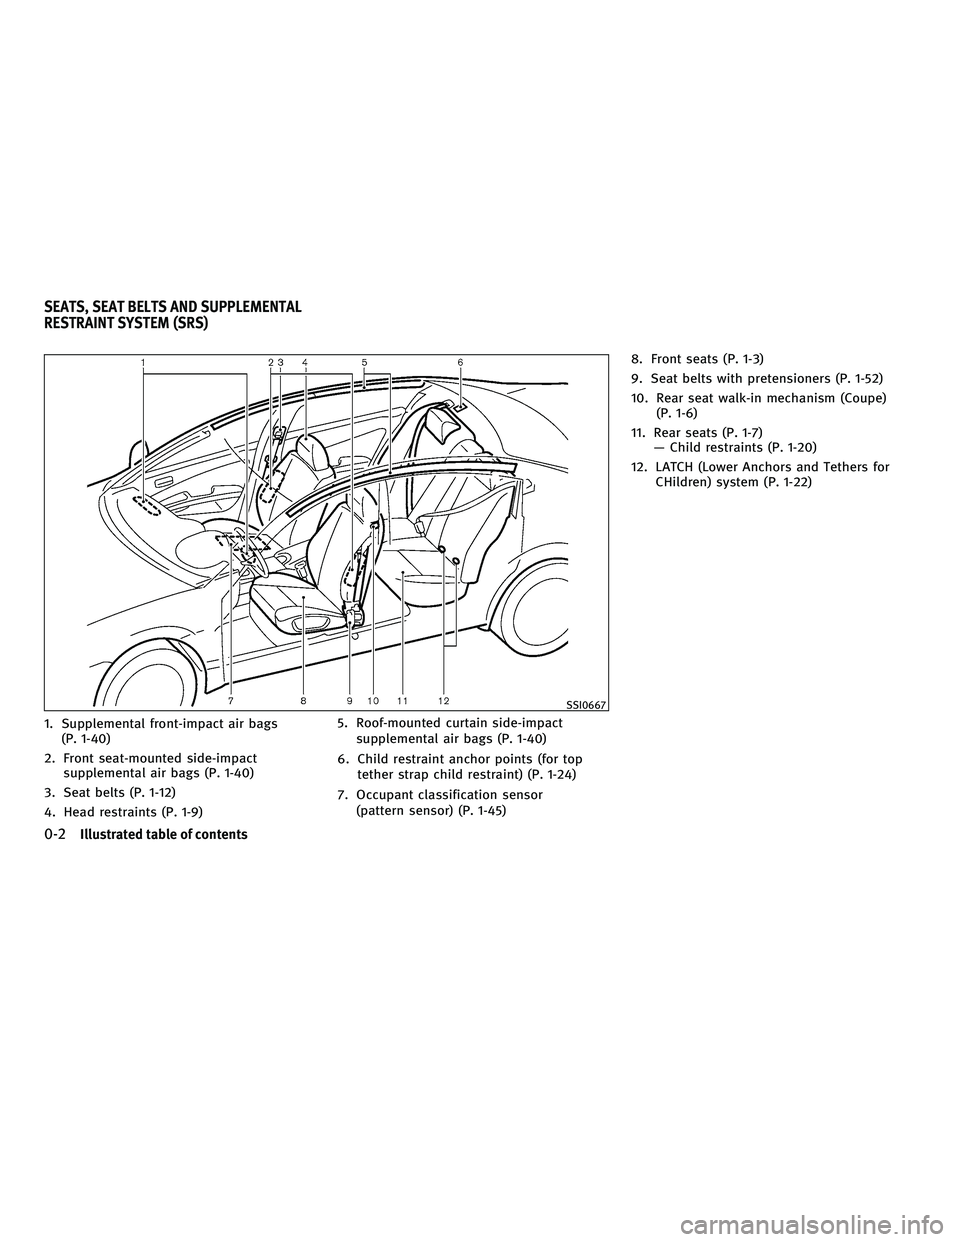 INFINITI G 2010 User Guide 1. Supplemental front-impact air bags(P. 1-40)
2. Front seat-mounted side-impact supplemental air bags (P. 1-40)
3. Seat belts (P. 1-12)
4. Head restraints (P. 1-9) 5. Roof-mounted curtain side-impact